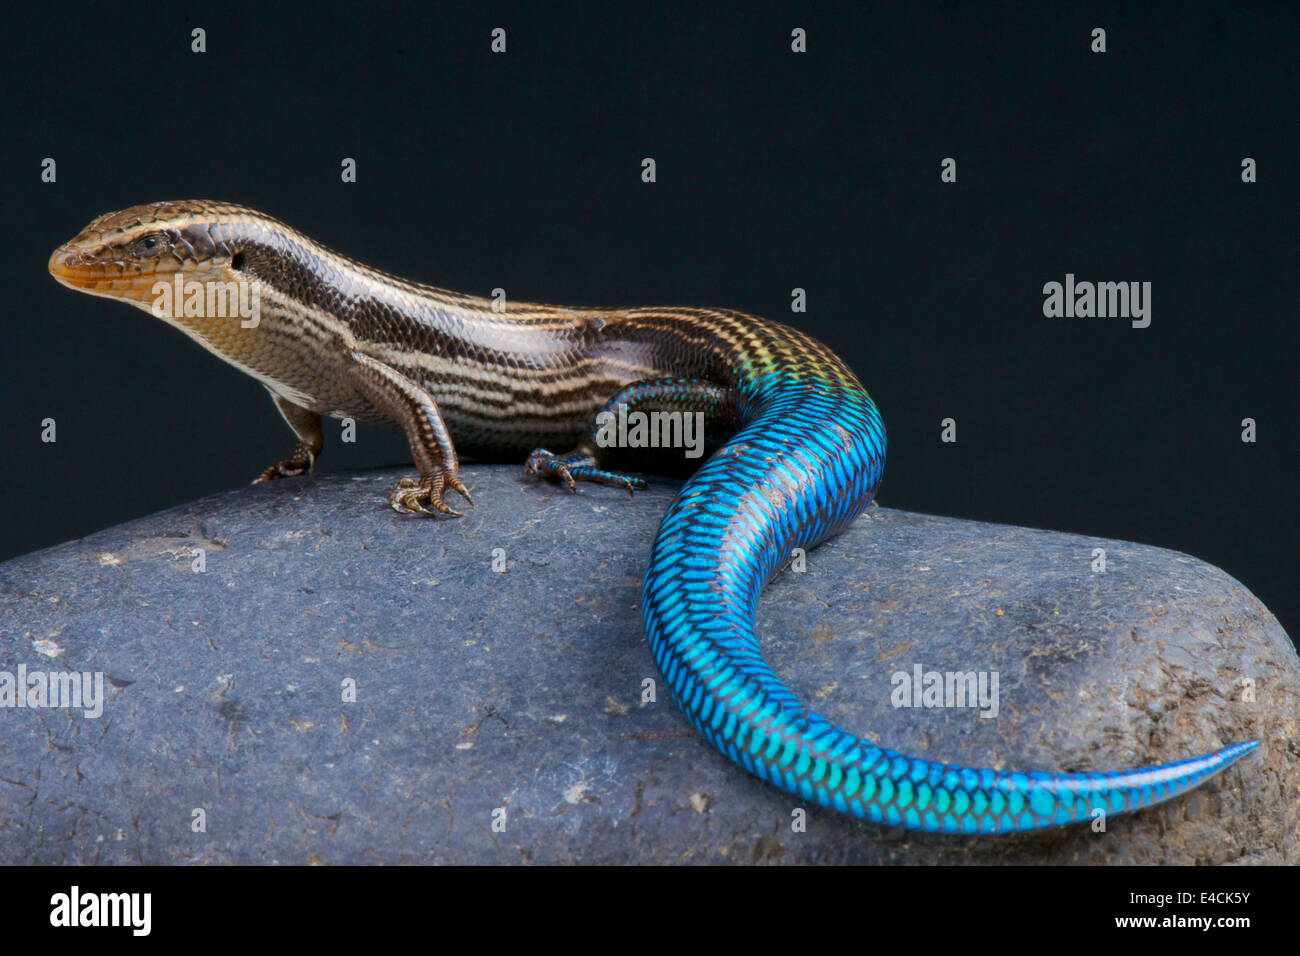 Gran Canaria blue-tailed skink / Chalcides sexlineatus Stock Photo